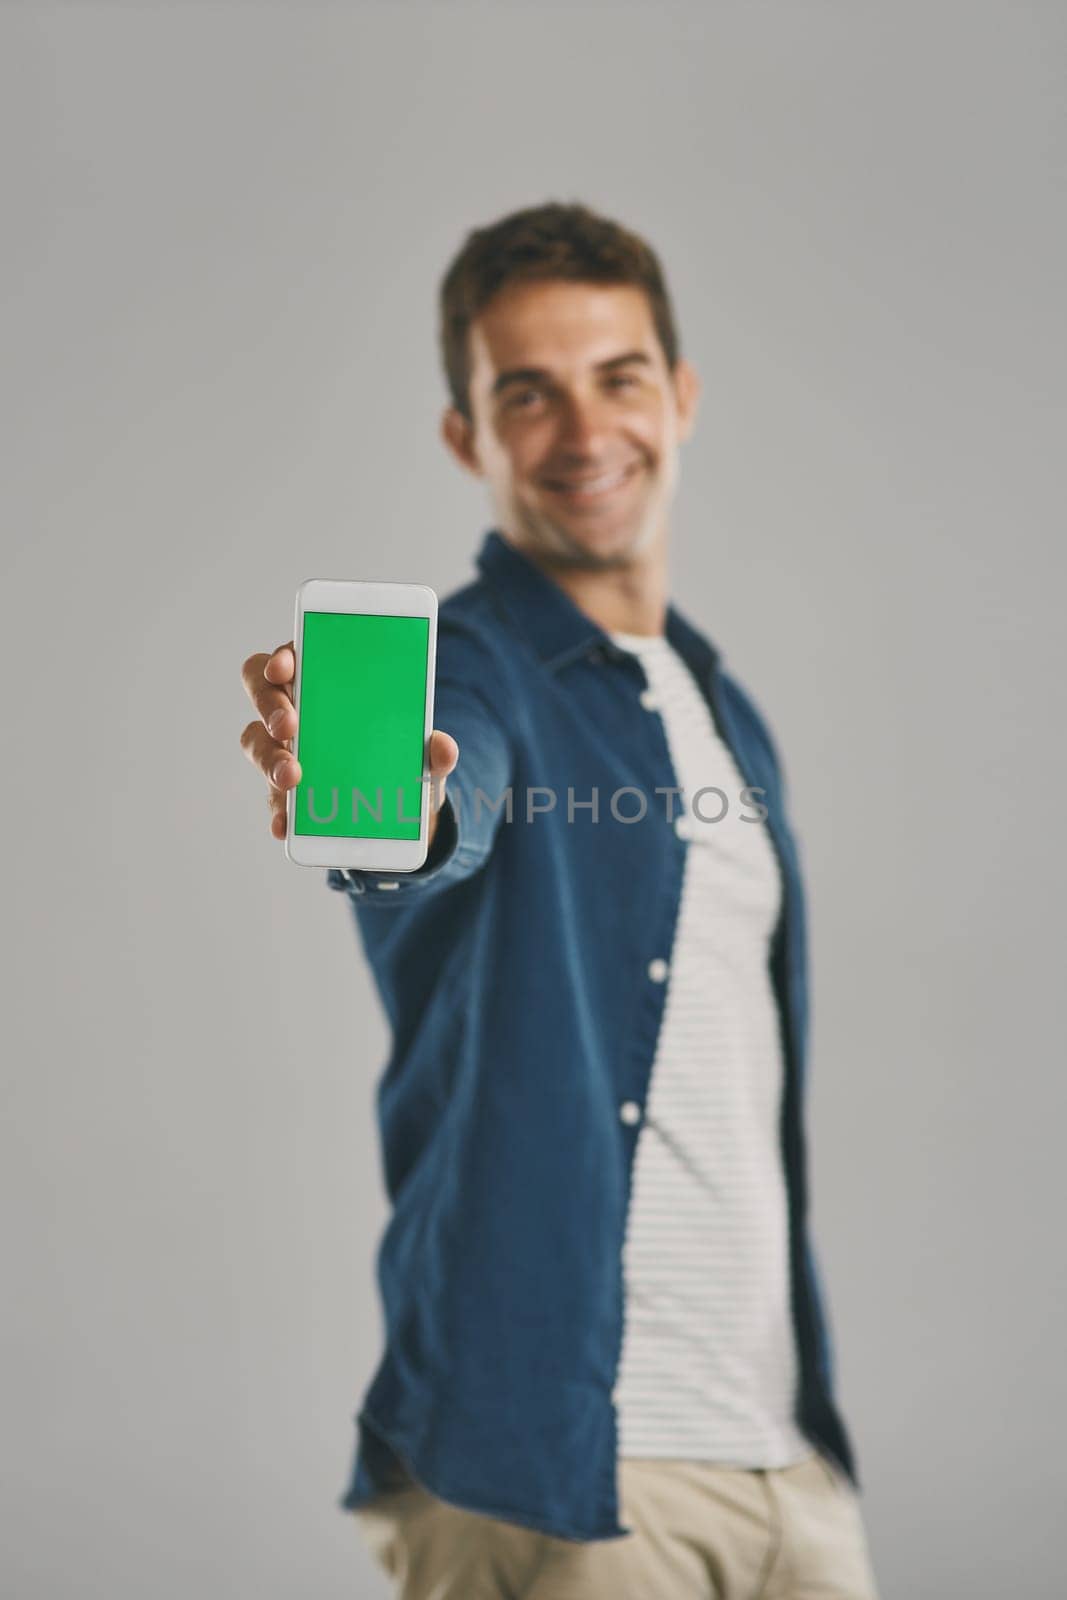 Living the smart life. Studio portrait of a young man holding a cellphone with a green screen against a grey background